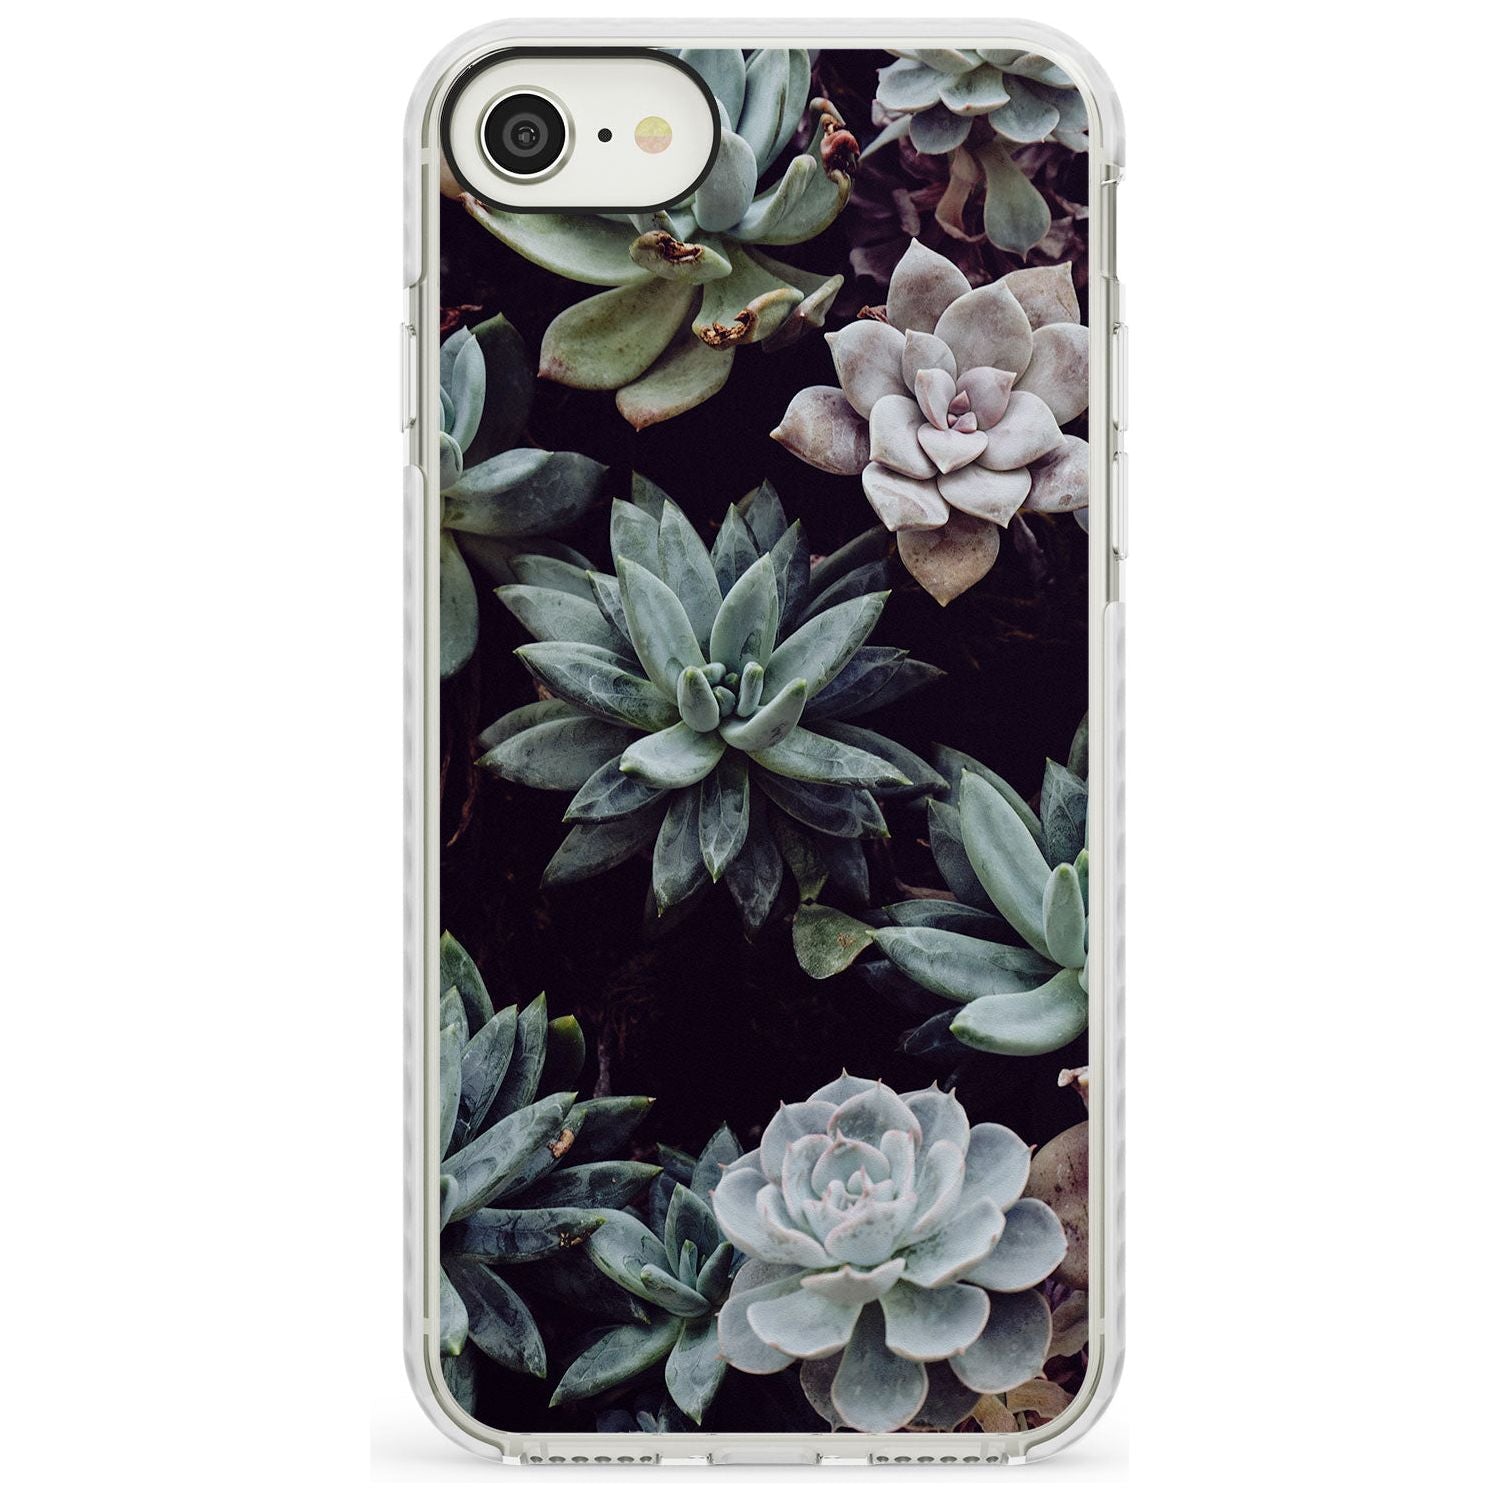 Mixed Succulents - Real Botanical Photographs Impact Phone Case for iPhone SE 8 7 Plus